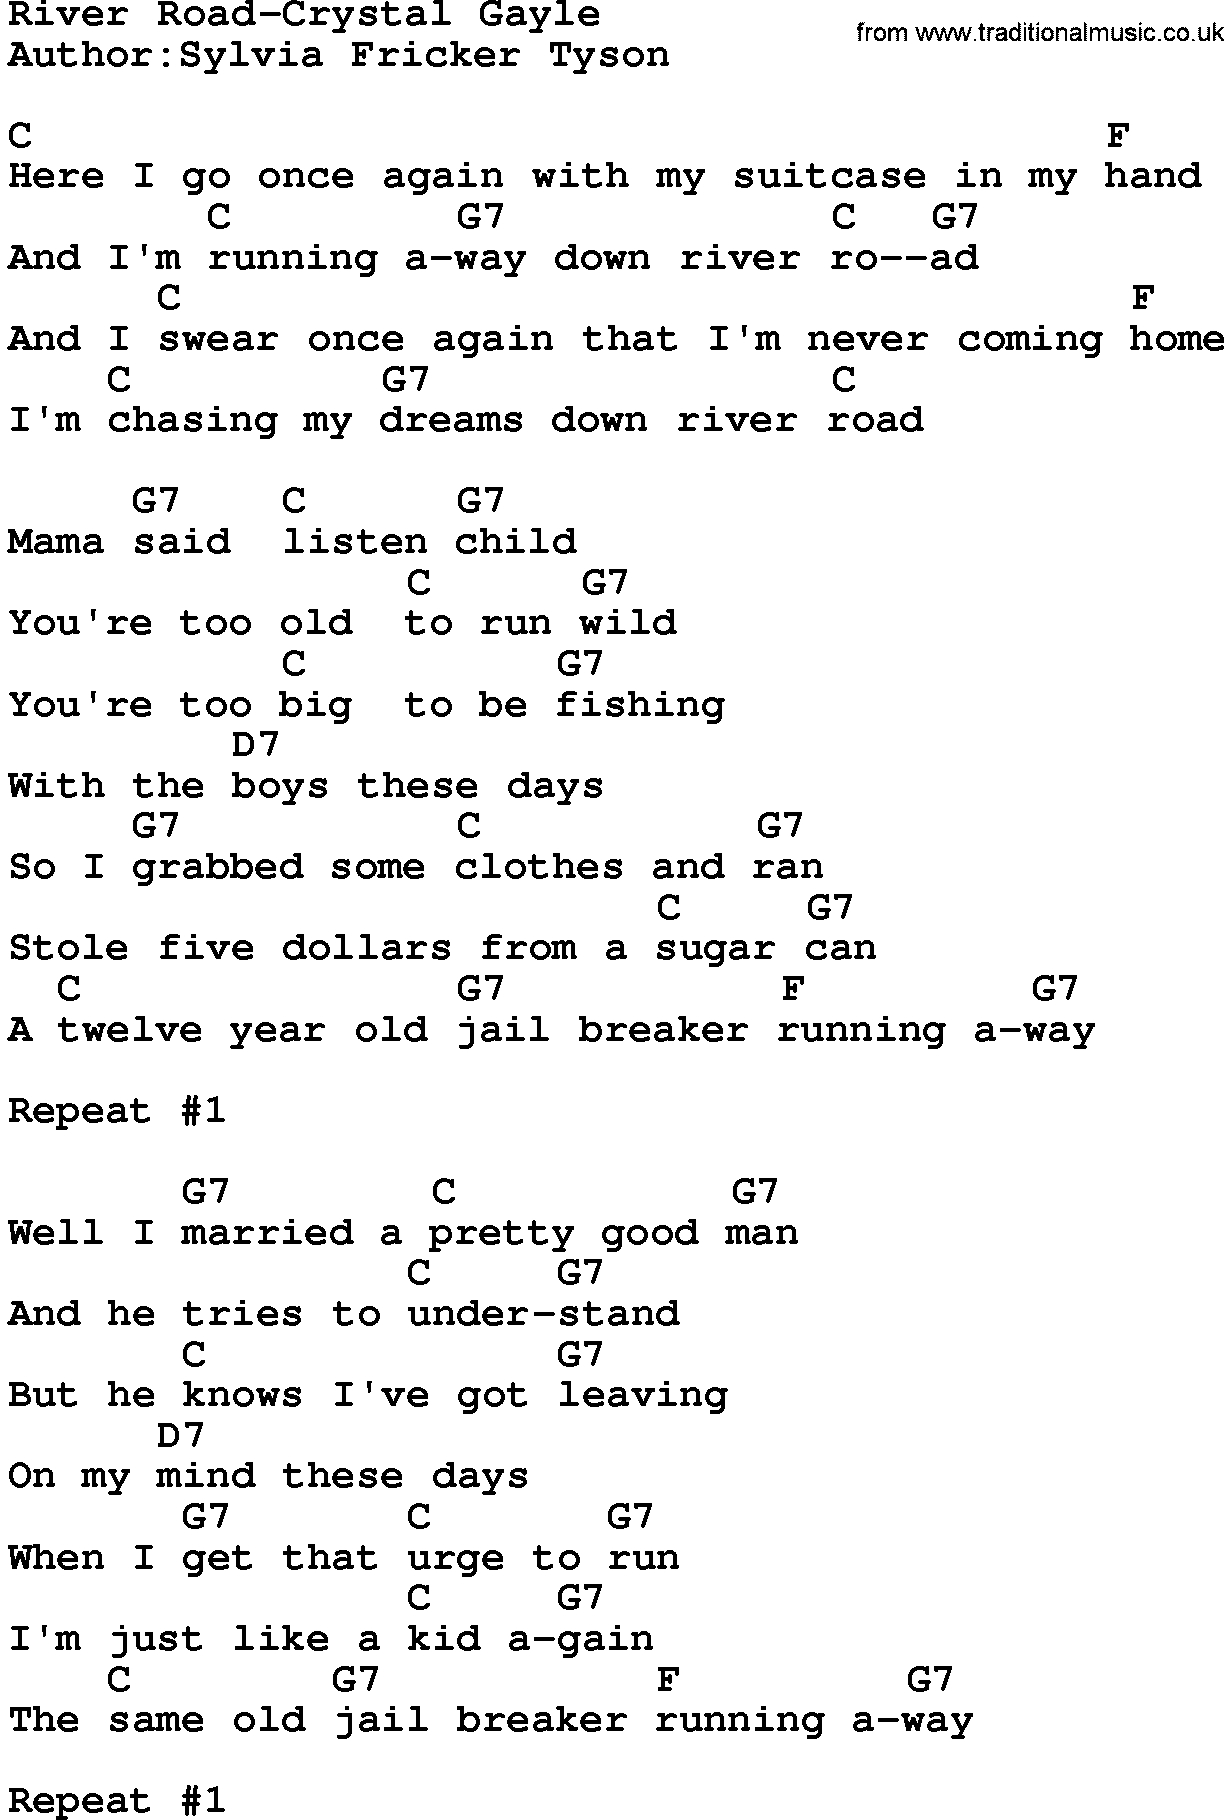 Rivers And Roads Chords Country Musicriver Road Crystal Gayle Lyrics And Chords